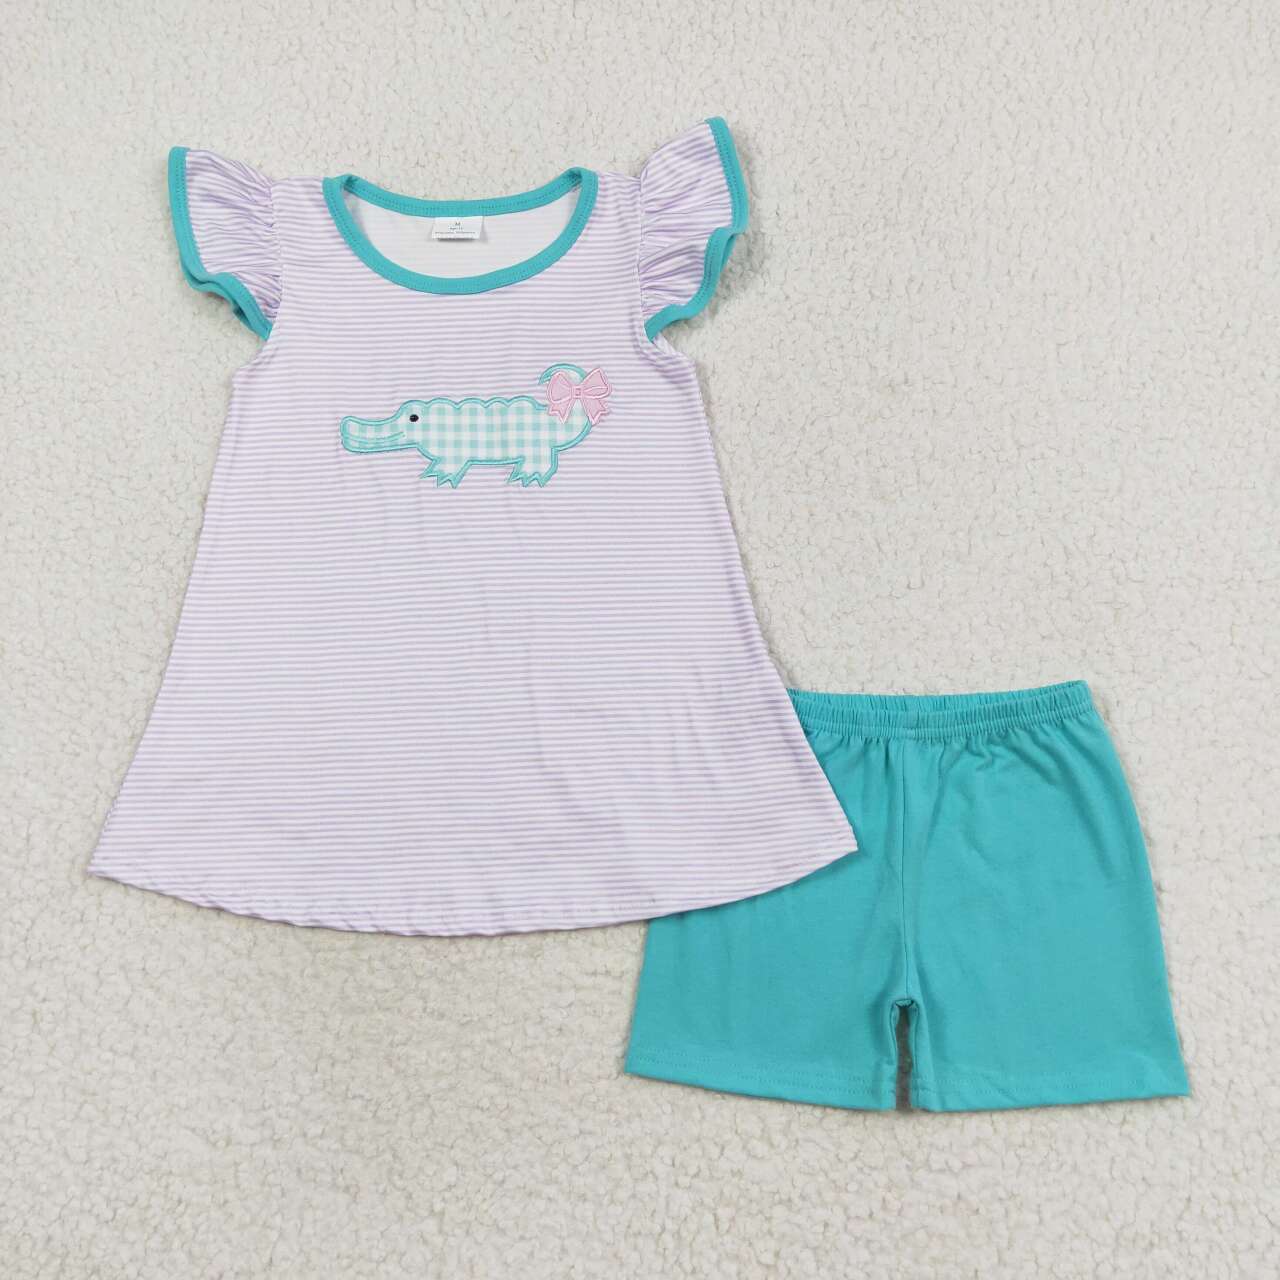 GSSO1286  Kids Girls summer clothes flying sleeves top with shorts set